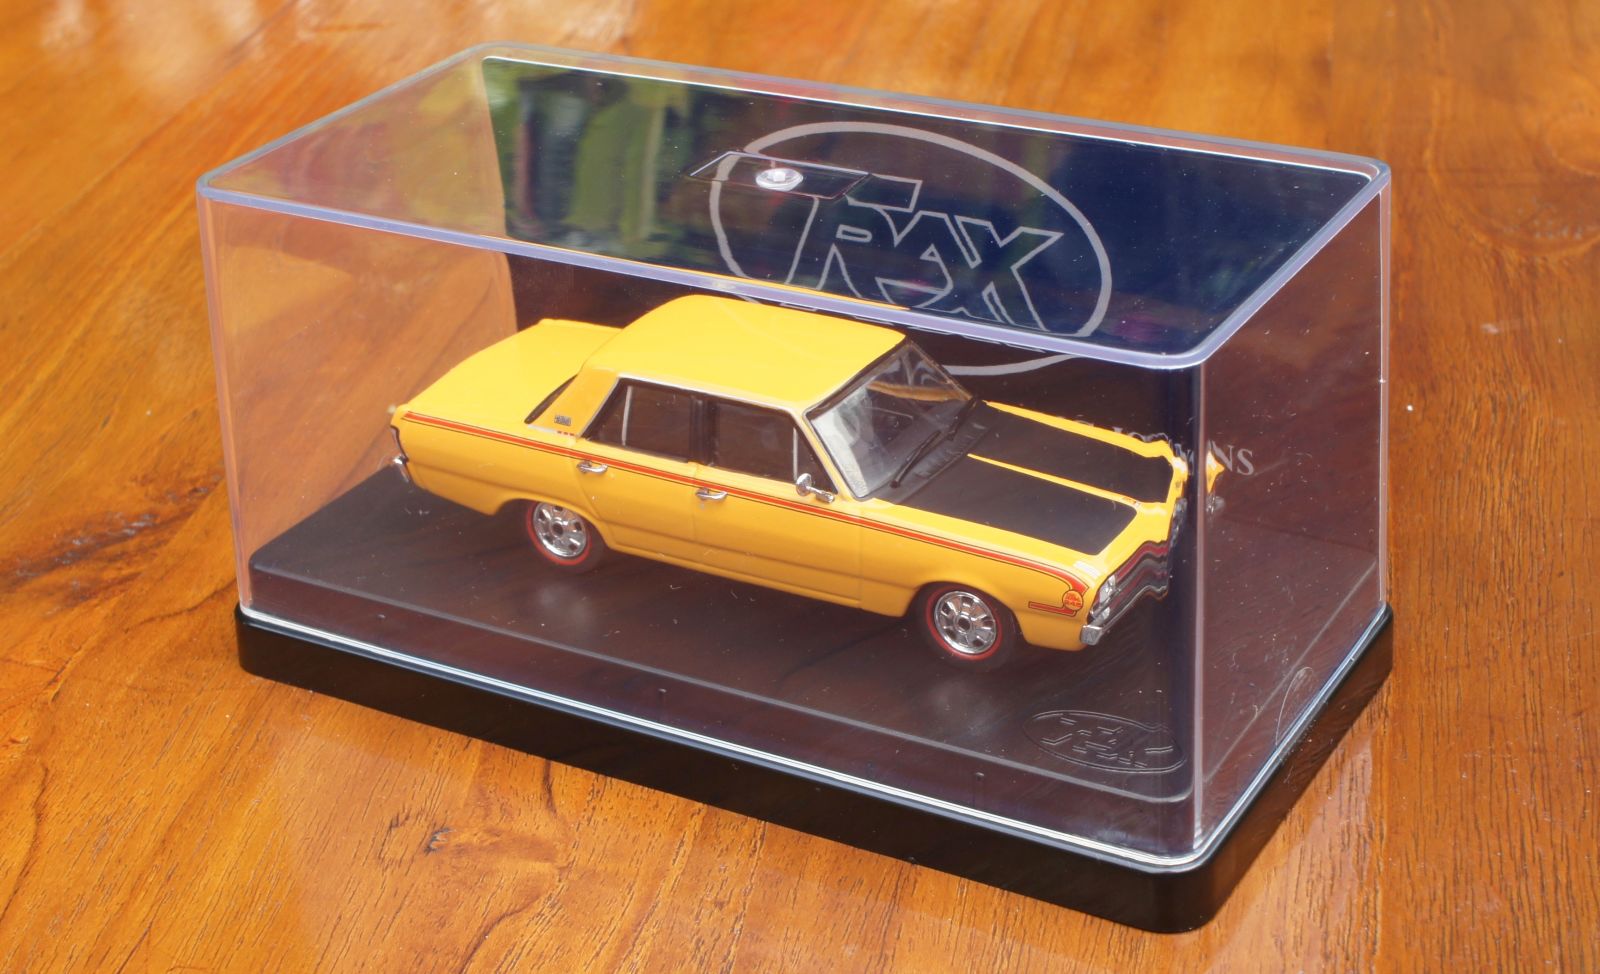 No Vaillante but a Trax 1/43 Chrysler VG Valiant Pacer Sedan. From an era it wasn’t just Ford and GM “down under”?